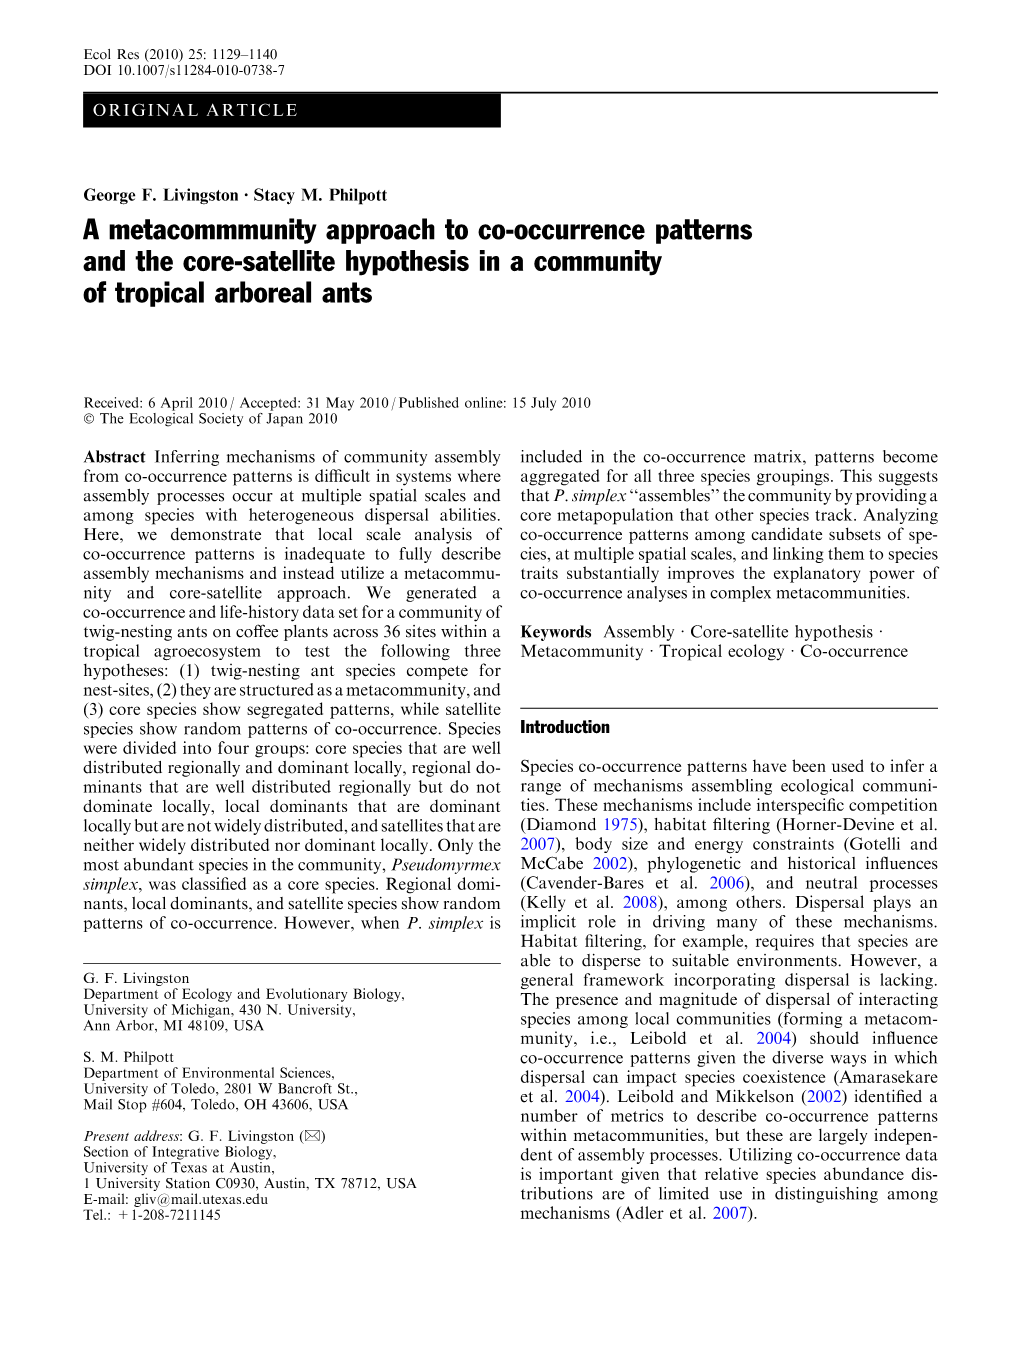 A Metacommmunity Approach to Co-Occurrence Patterns and the Core-Satellite Hypothesis in a Community of Tropical Arboreal Ants